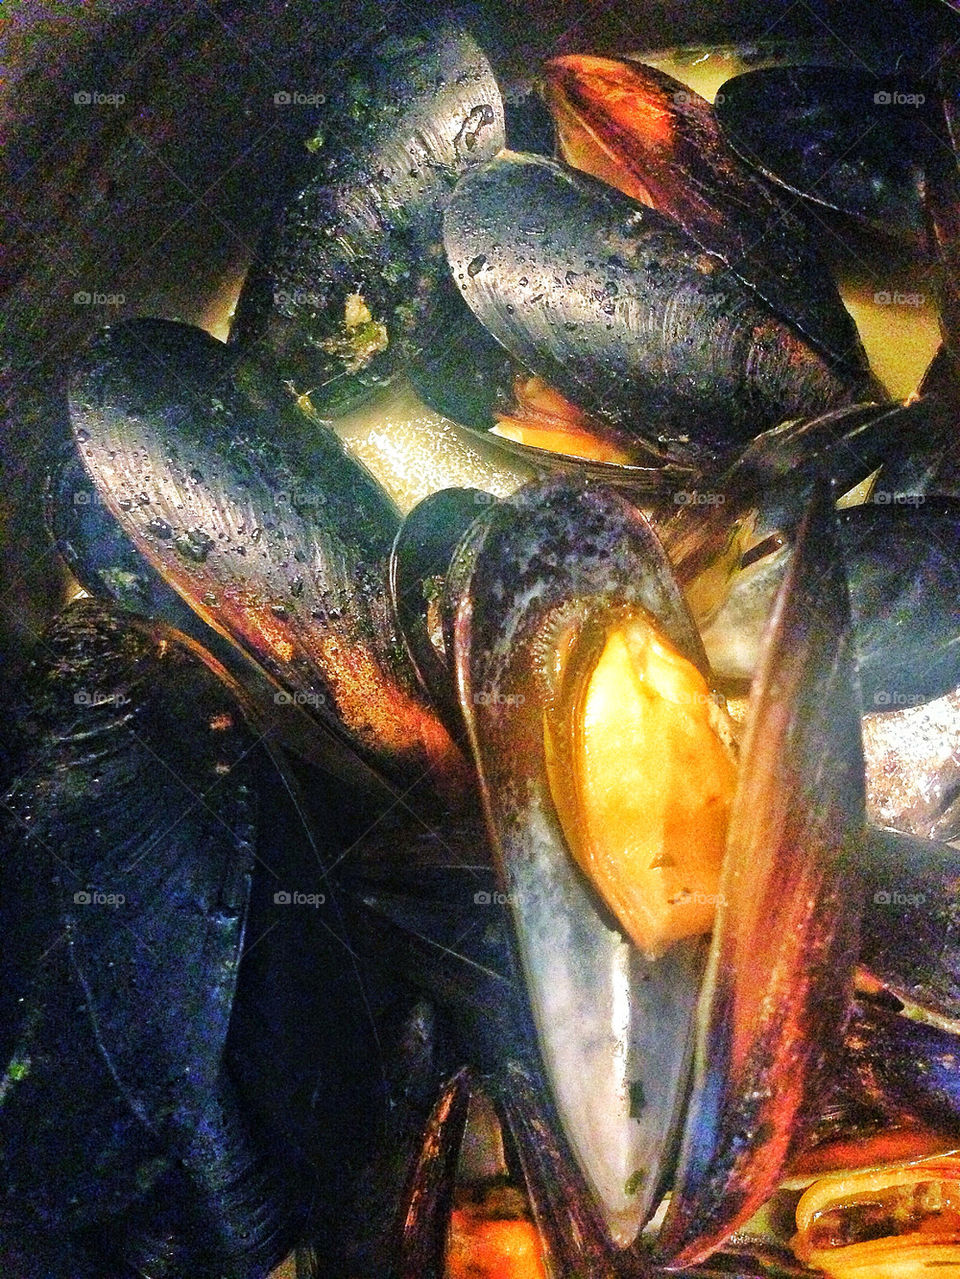 Mussels steamed in a pot